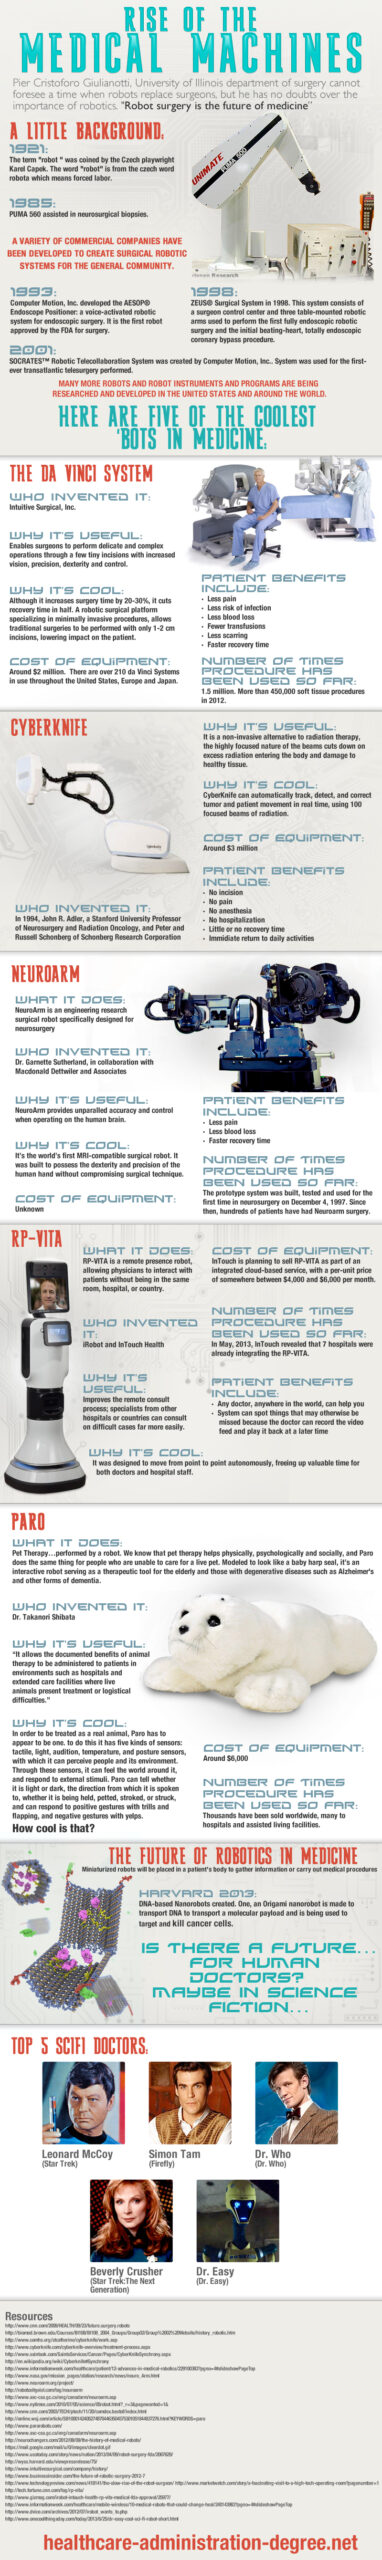  Five of the Coolest “Bots” in Medicine [INFOGRAPHIC]